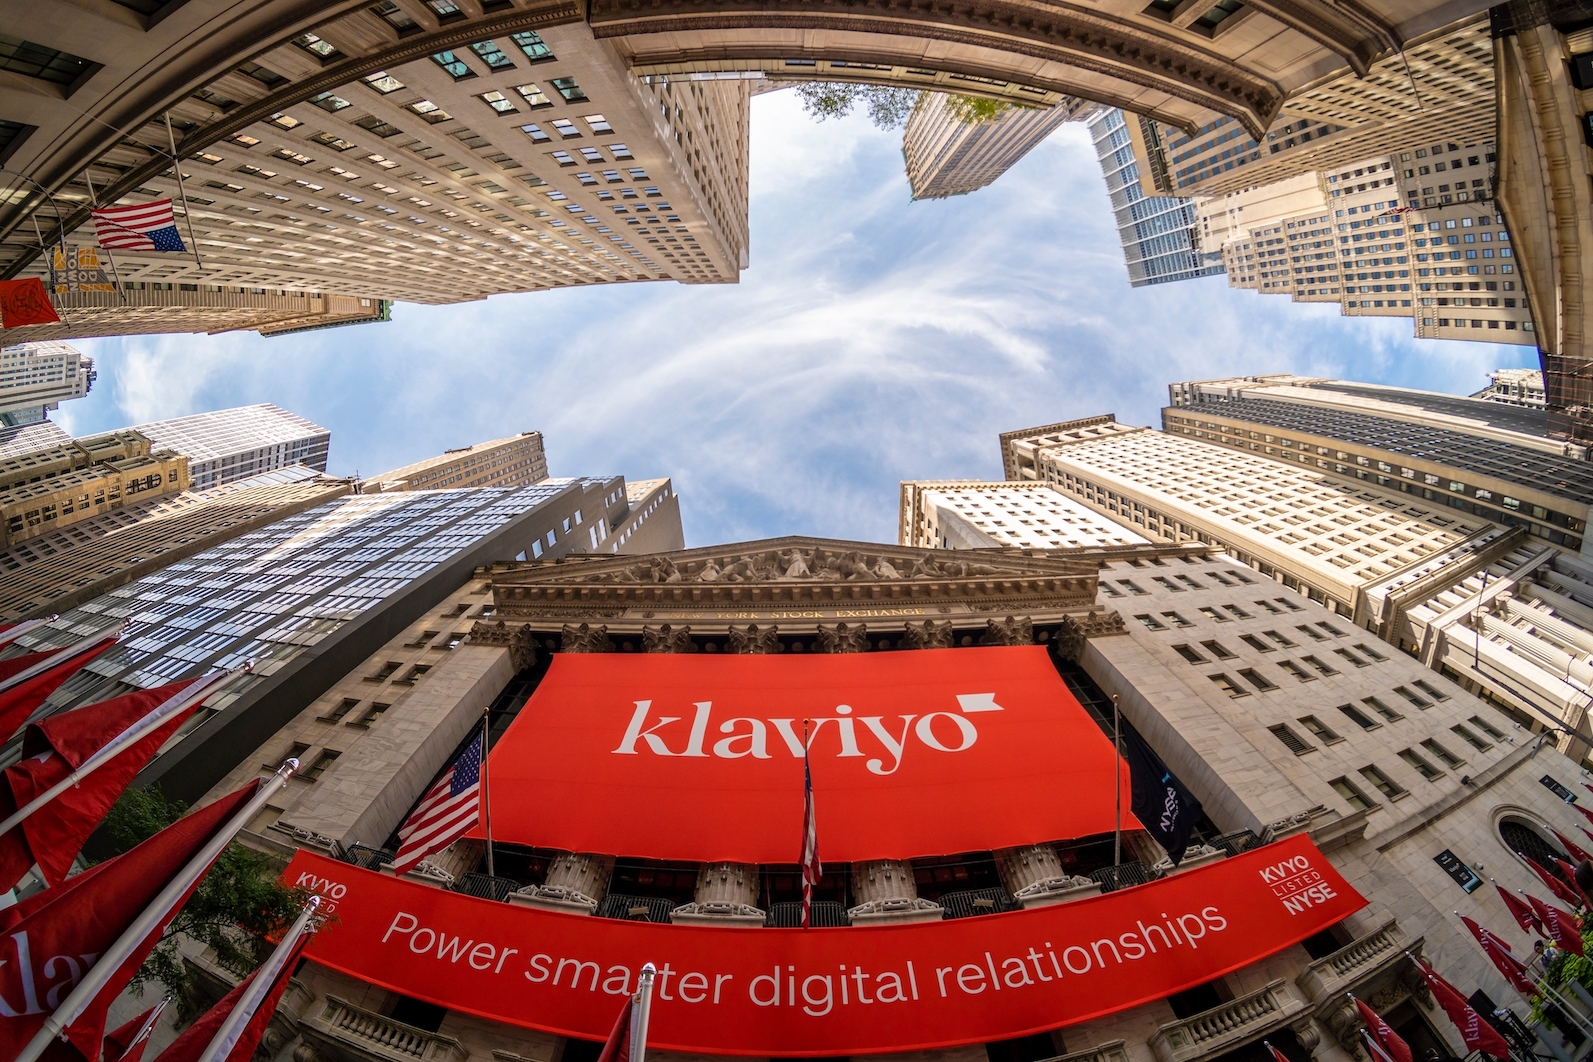 New York Stock Exchange is decorated for the initial public offering of Klaviyo